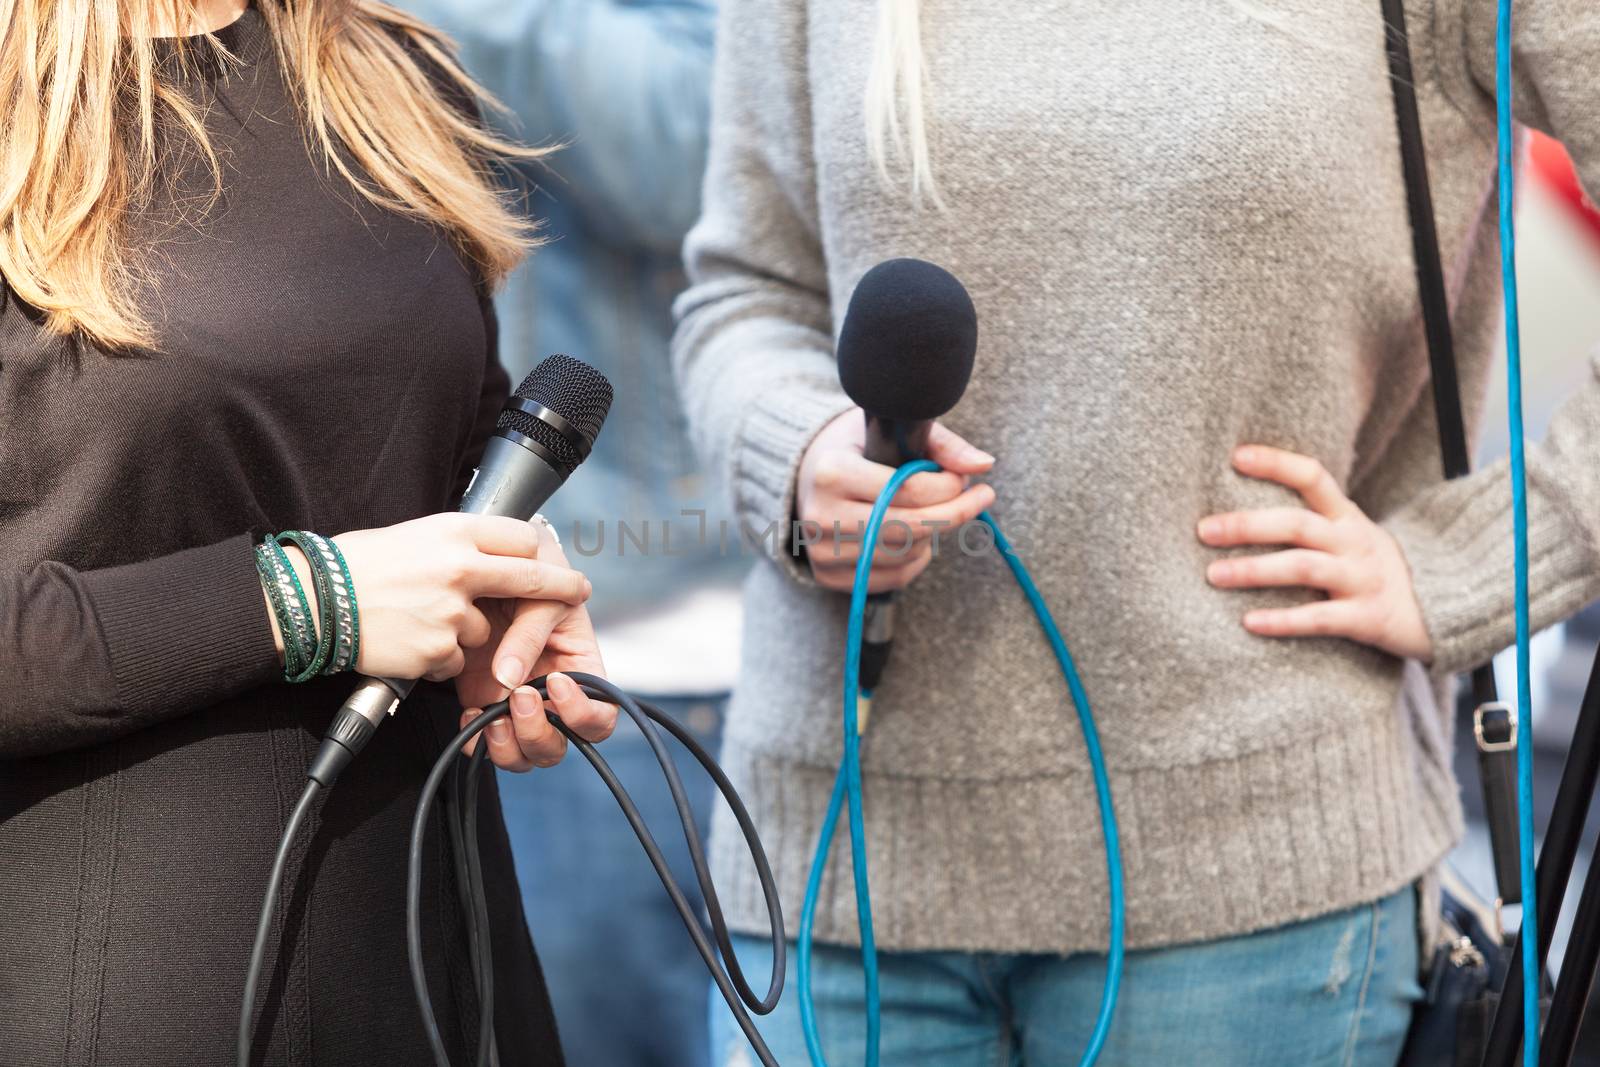 Female journalists holding microphones waiting for press conference